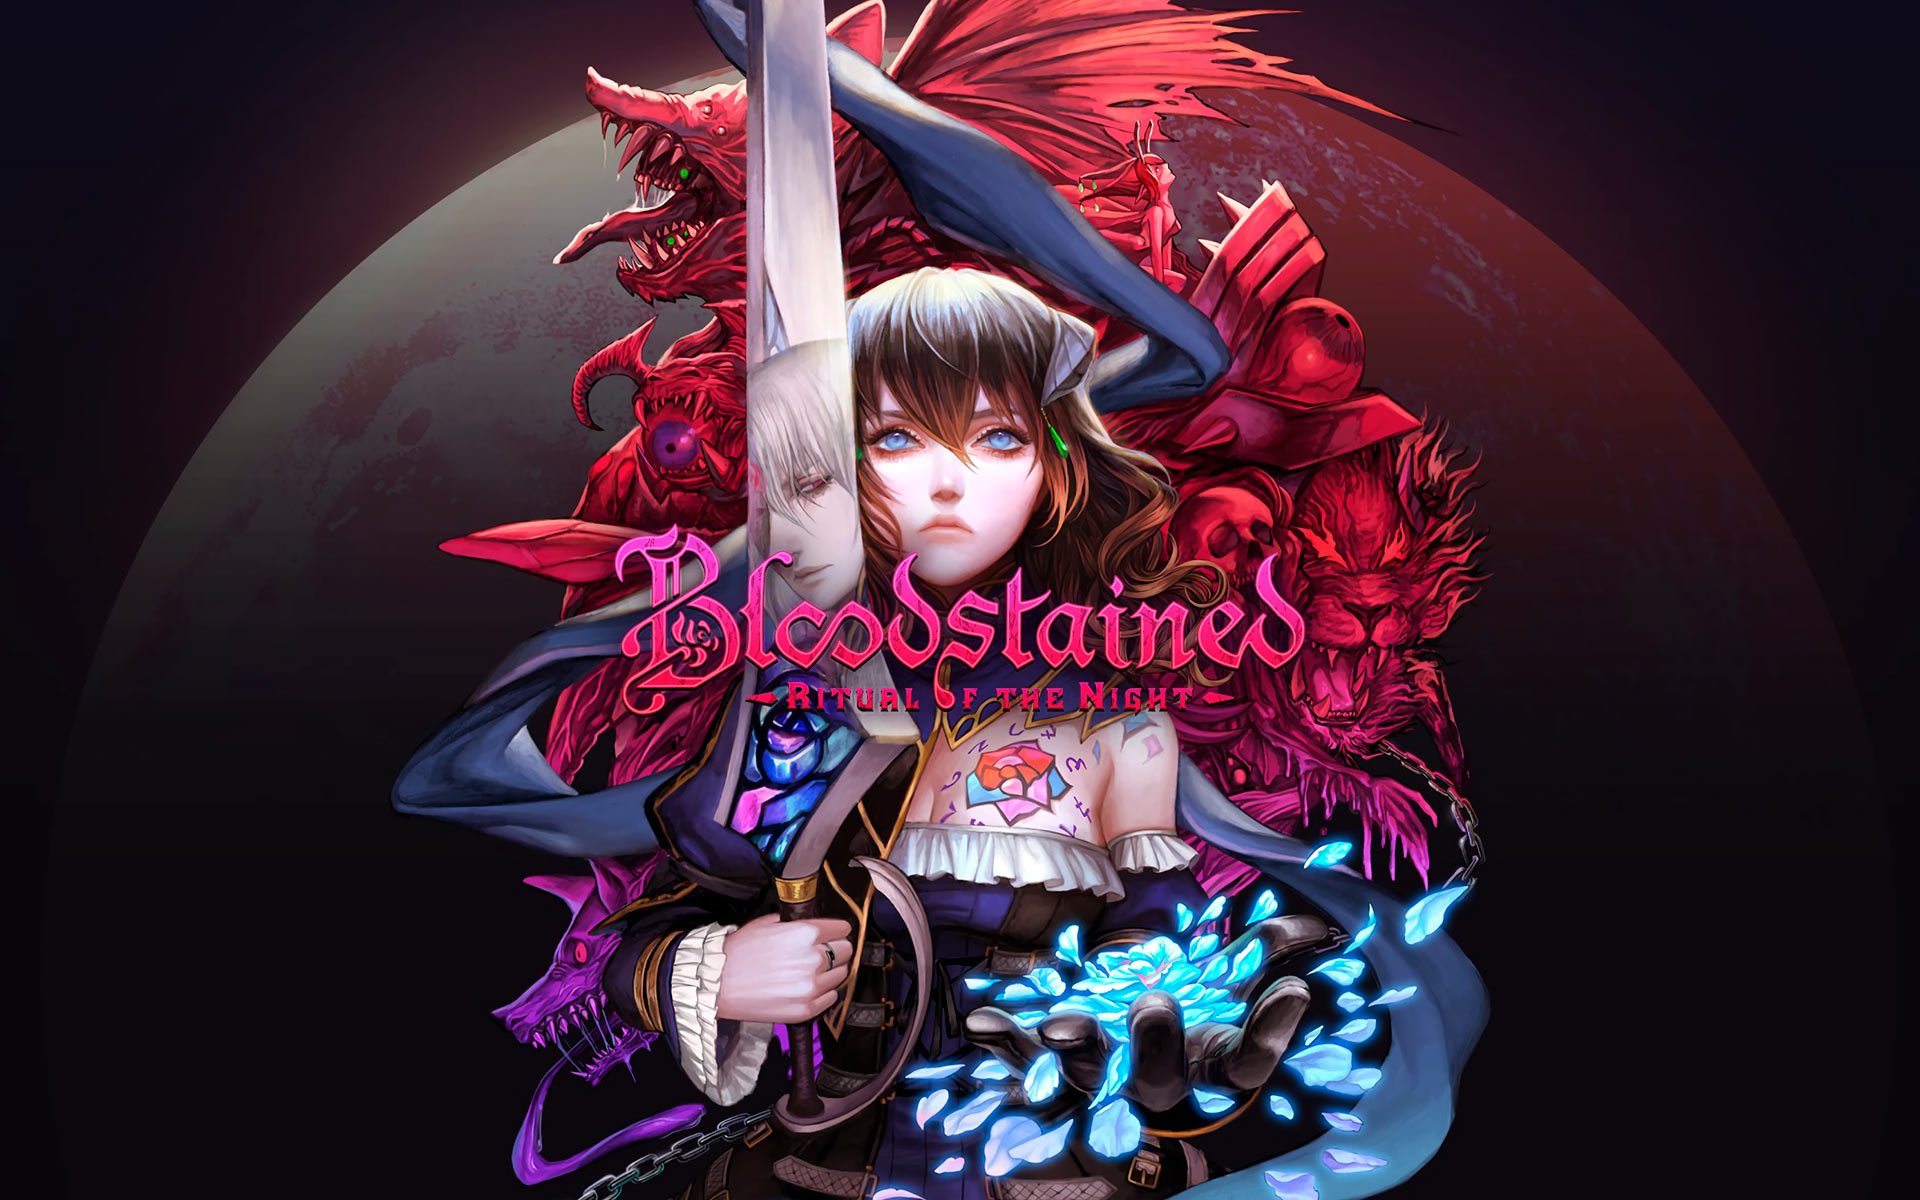 Compre Bloodstained Ritual of the Night a partir de R$ 75.49